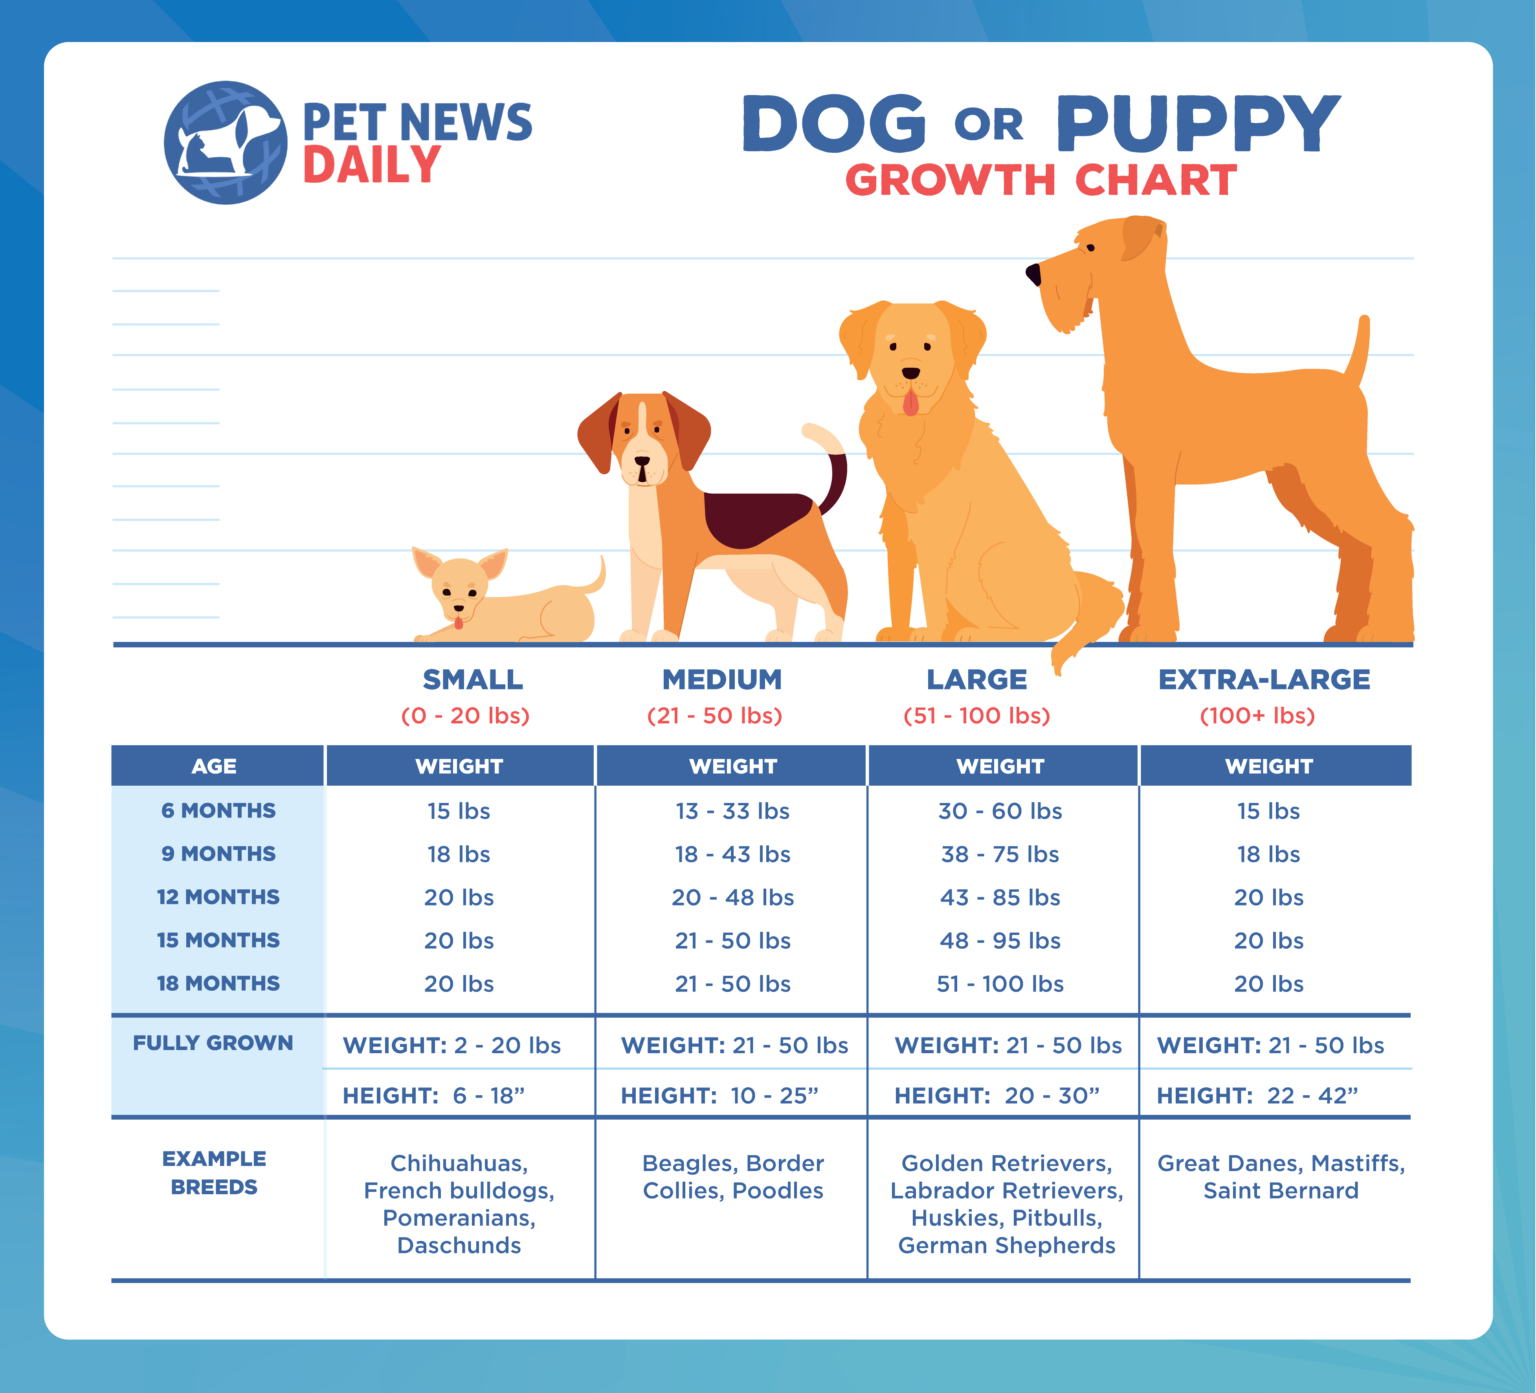 Dog (or Puppy) Growth Chart: How Big Will Your Puppy Get? - Pet News Daily